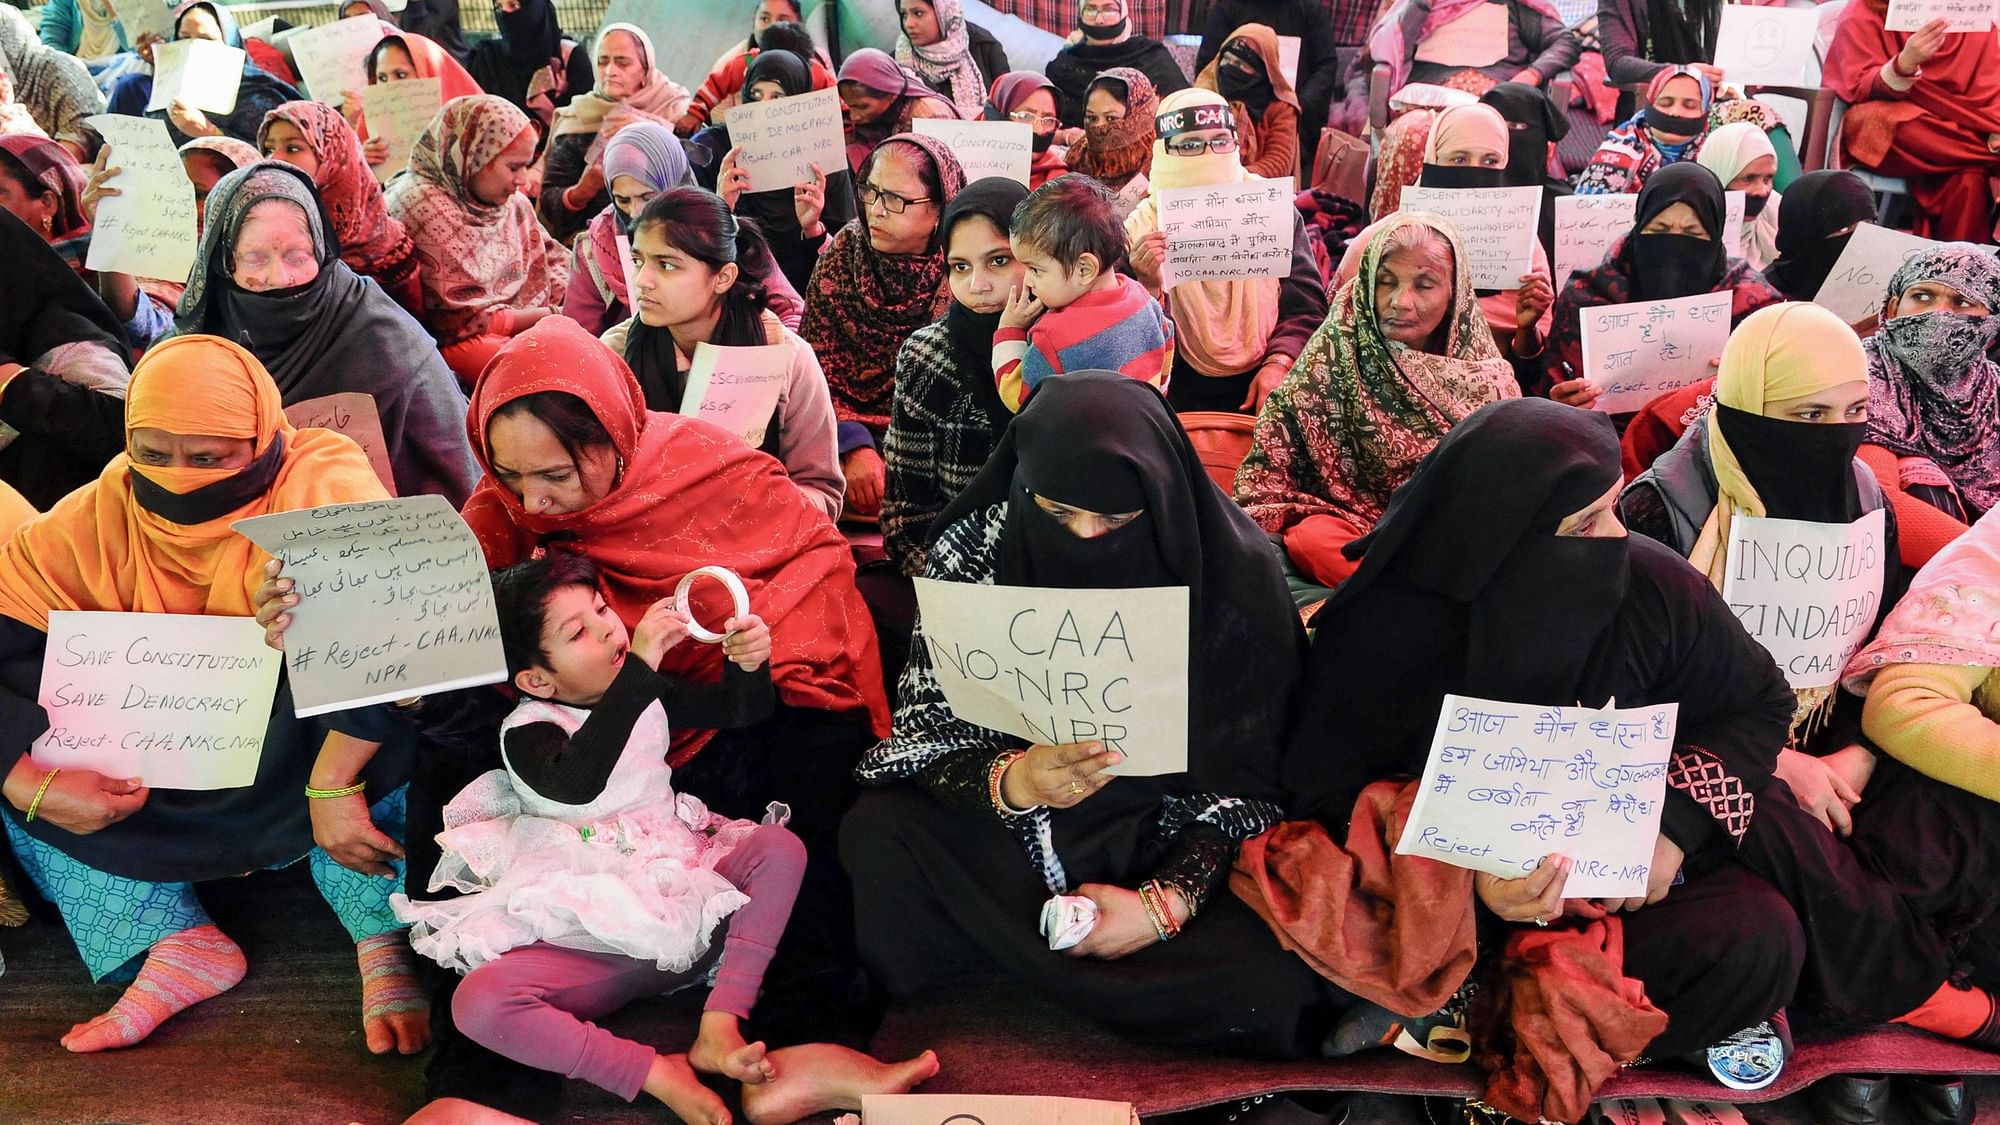 Anti-CAA Protests: Women and children hold placards during a silent protest against CAA and NRC at Shaheen Bagh in New Delhi. Image used for representation.